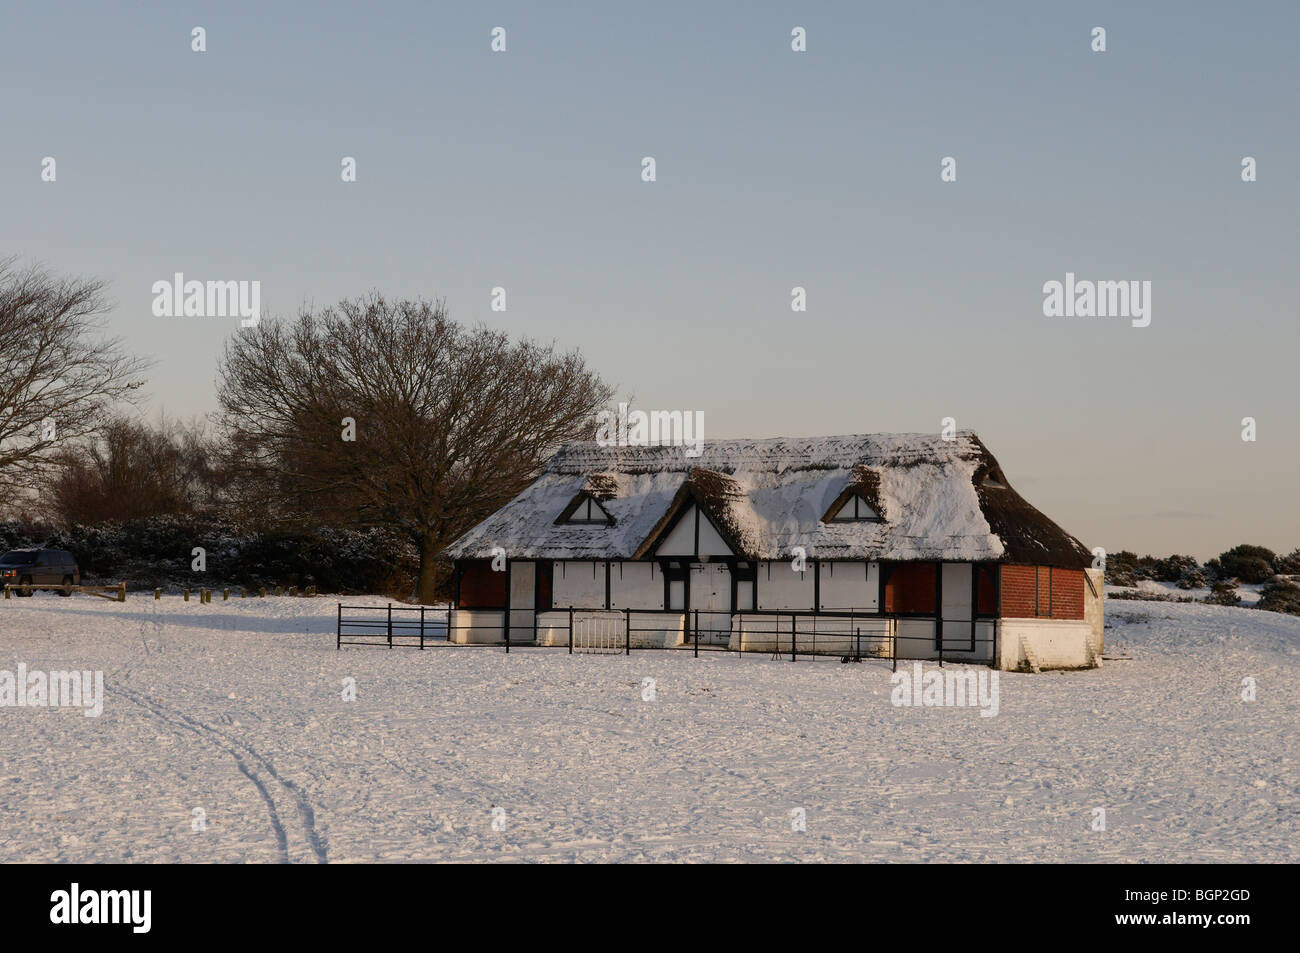 The snow covered cricket pavillion at Bolton's Bench at Lyndhurst in the New Forest National Park, Hampshire, England. Stock Photo